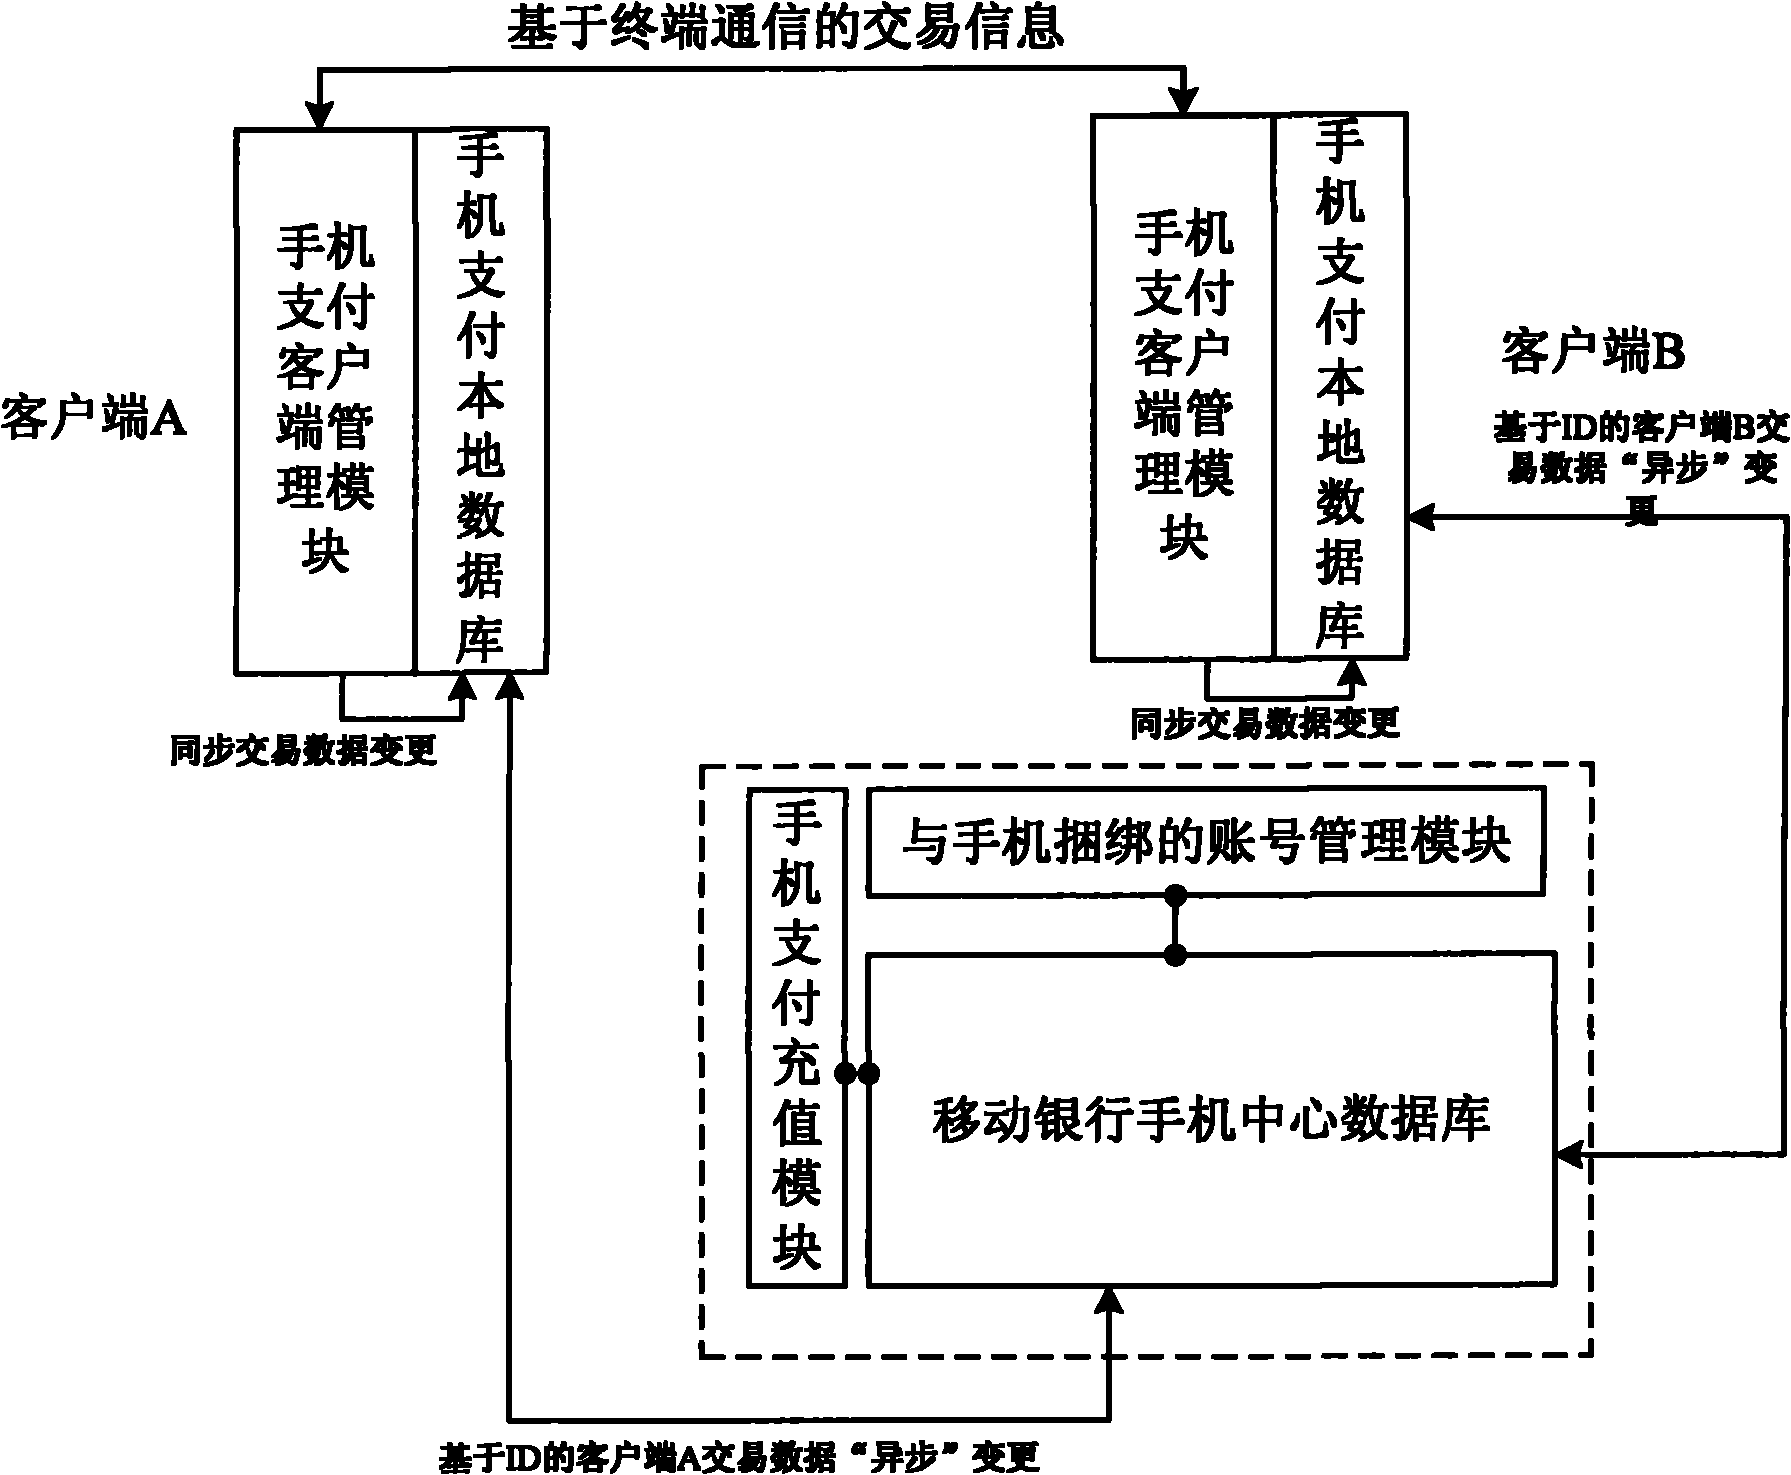 Method and system for interacting instant information between mobile terminals